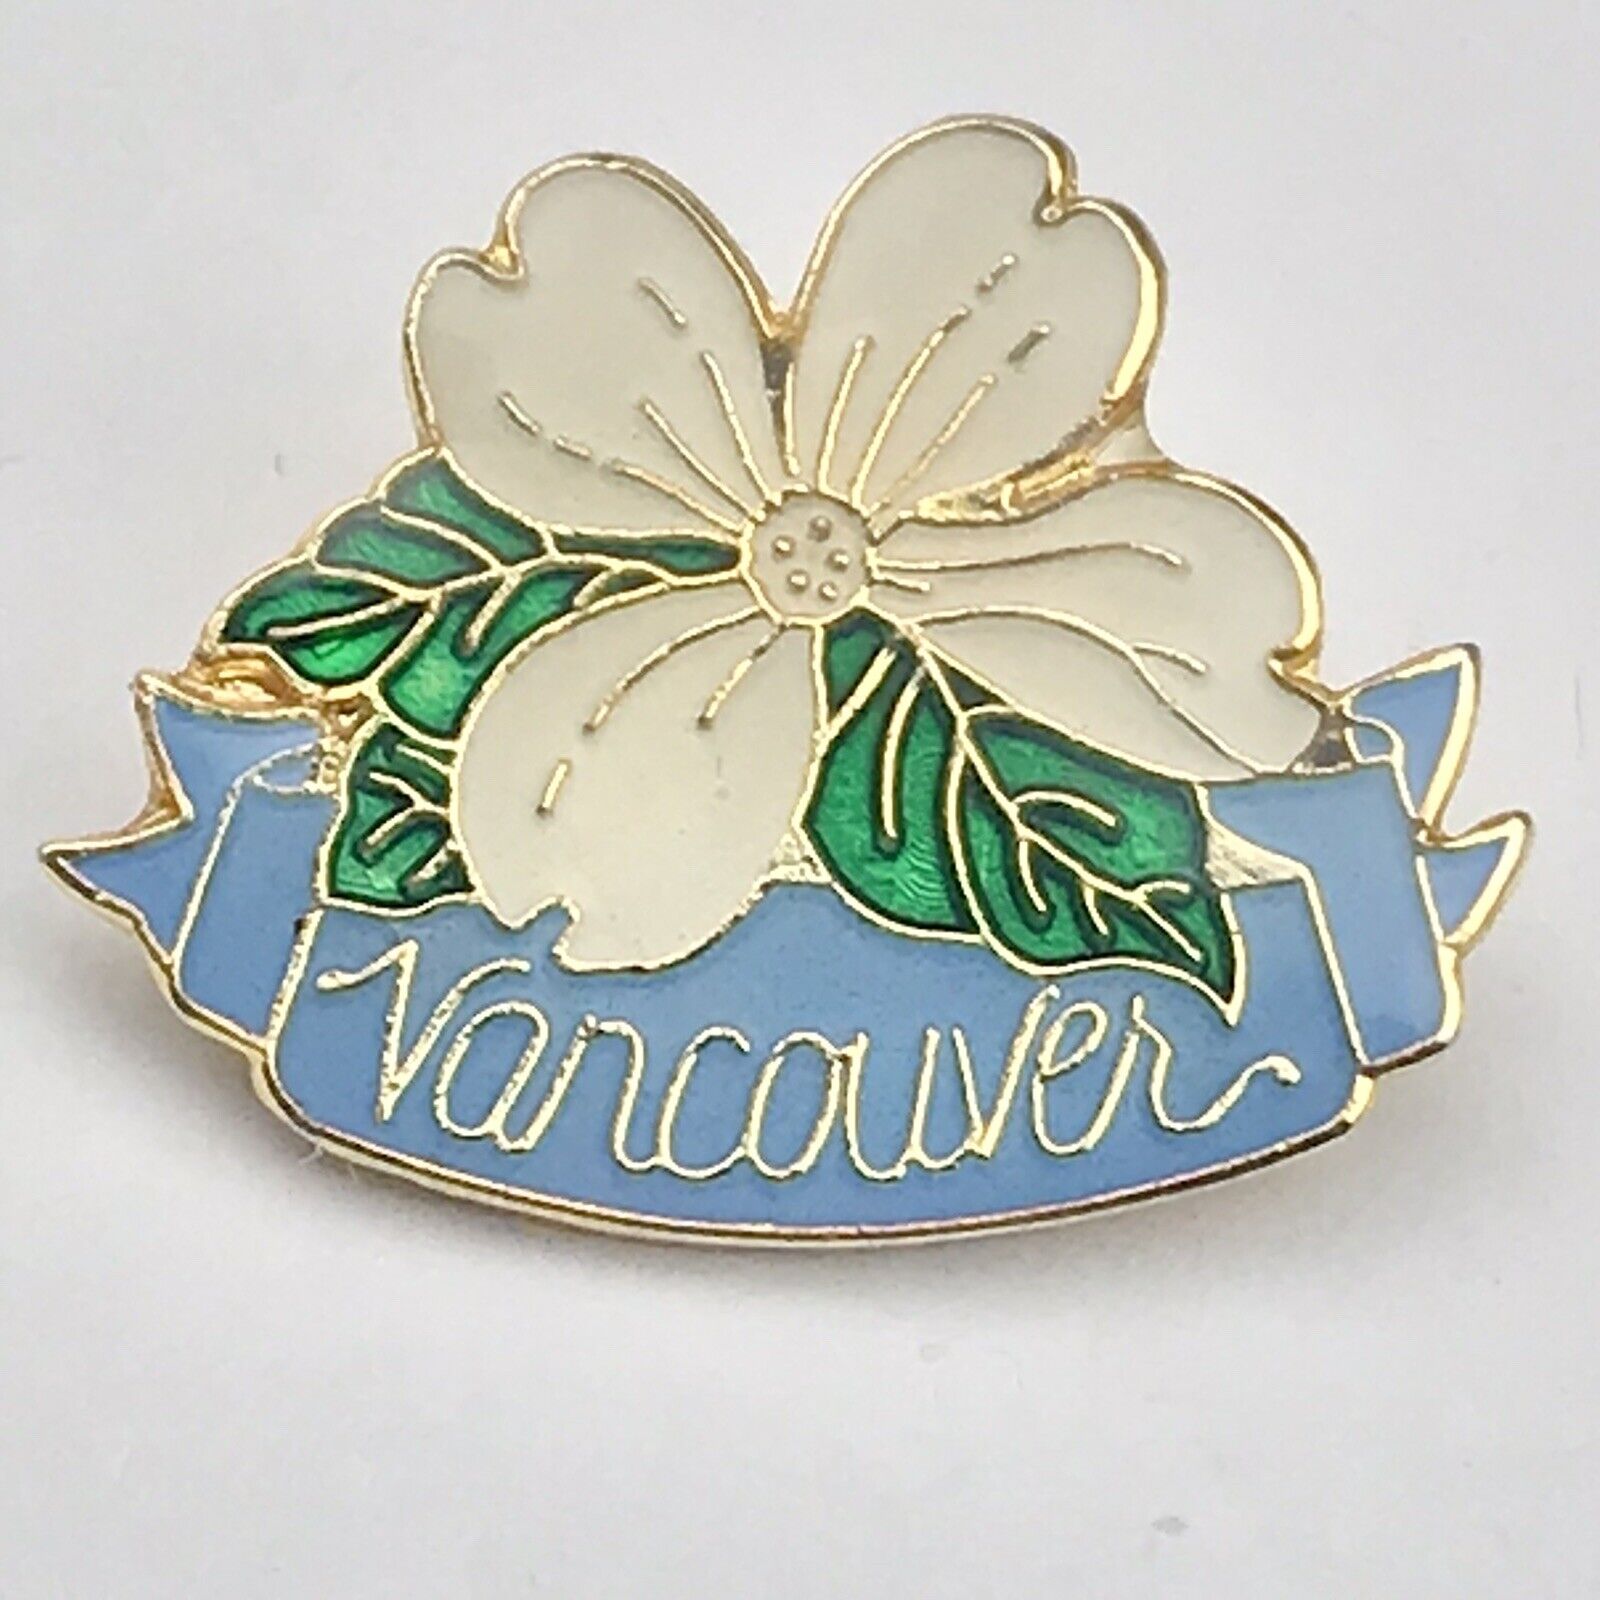 Vancouver BC Flower Gold Tone Enamel Pin Brooch Canada